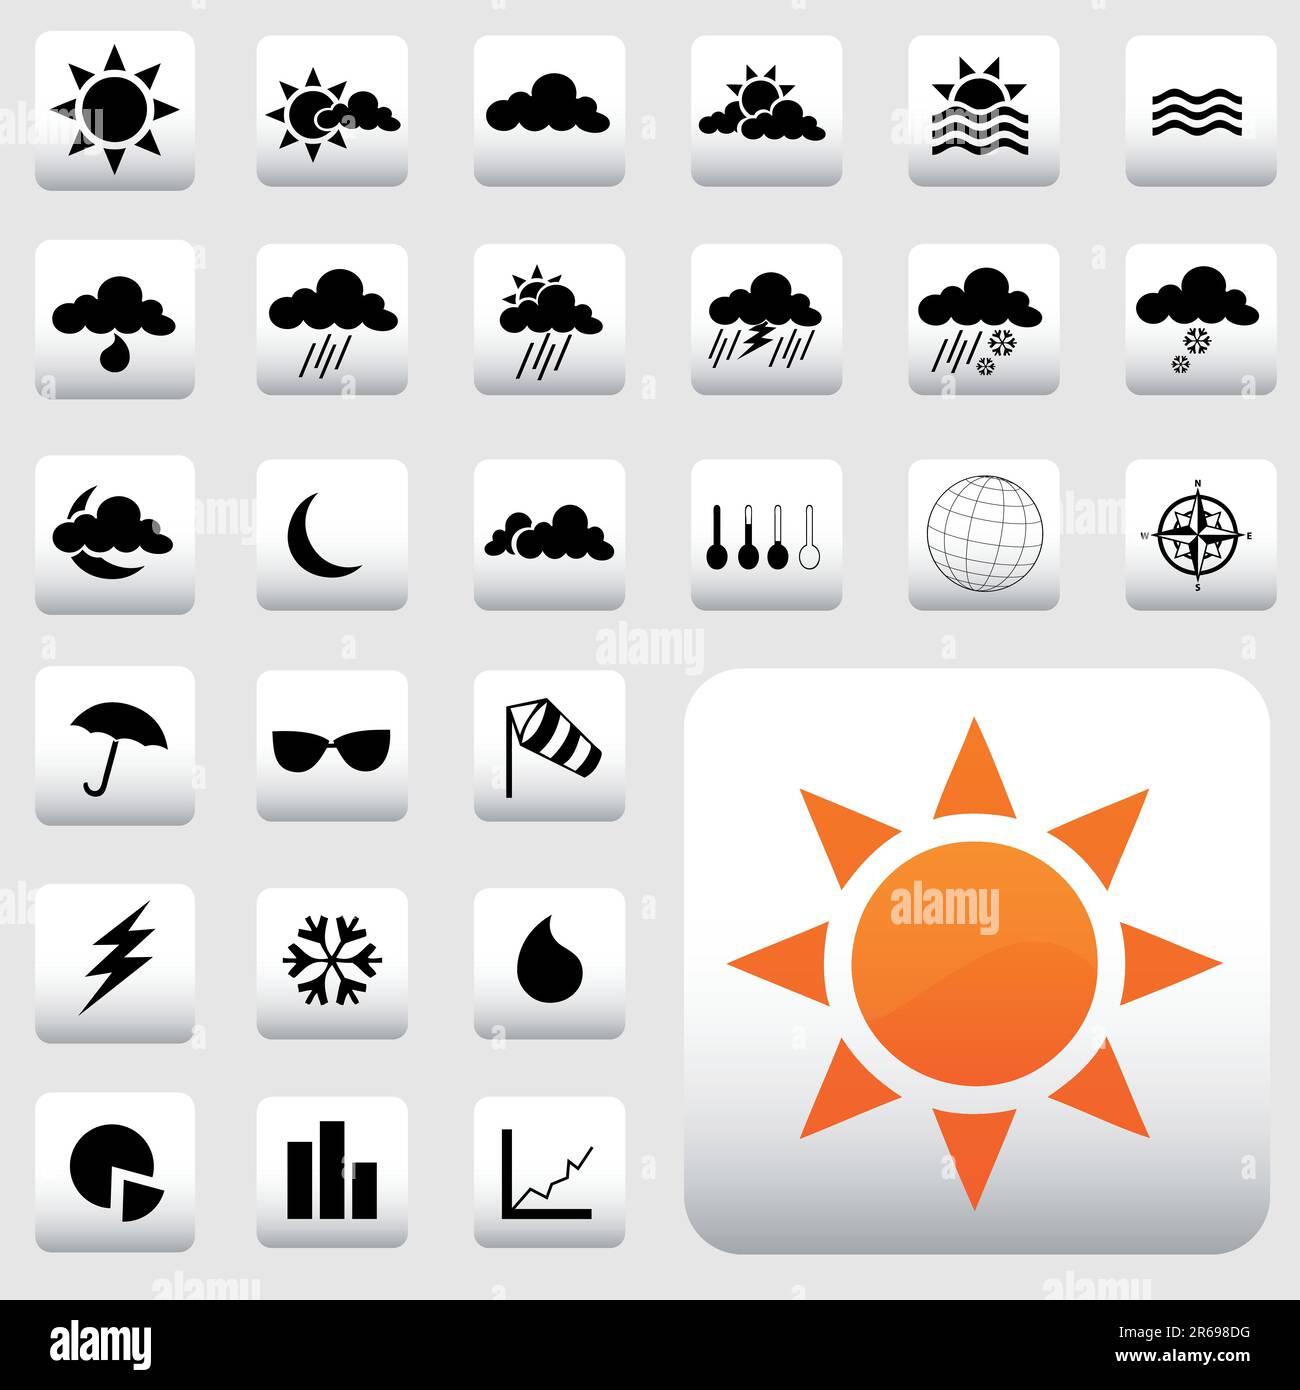 vector set of various weather icons Stock Vector